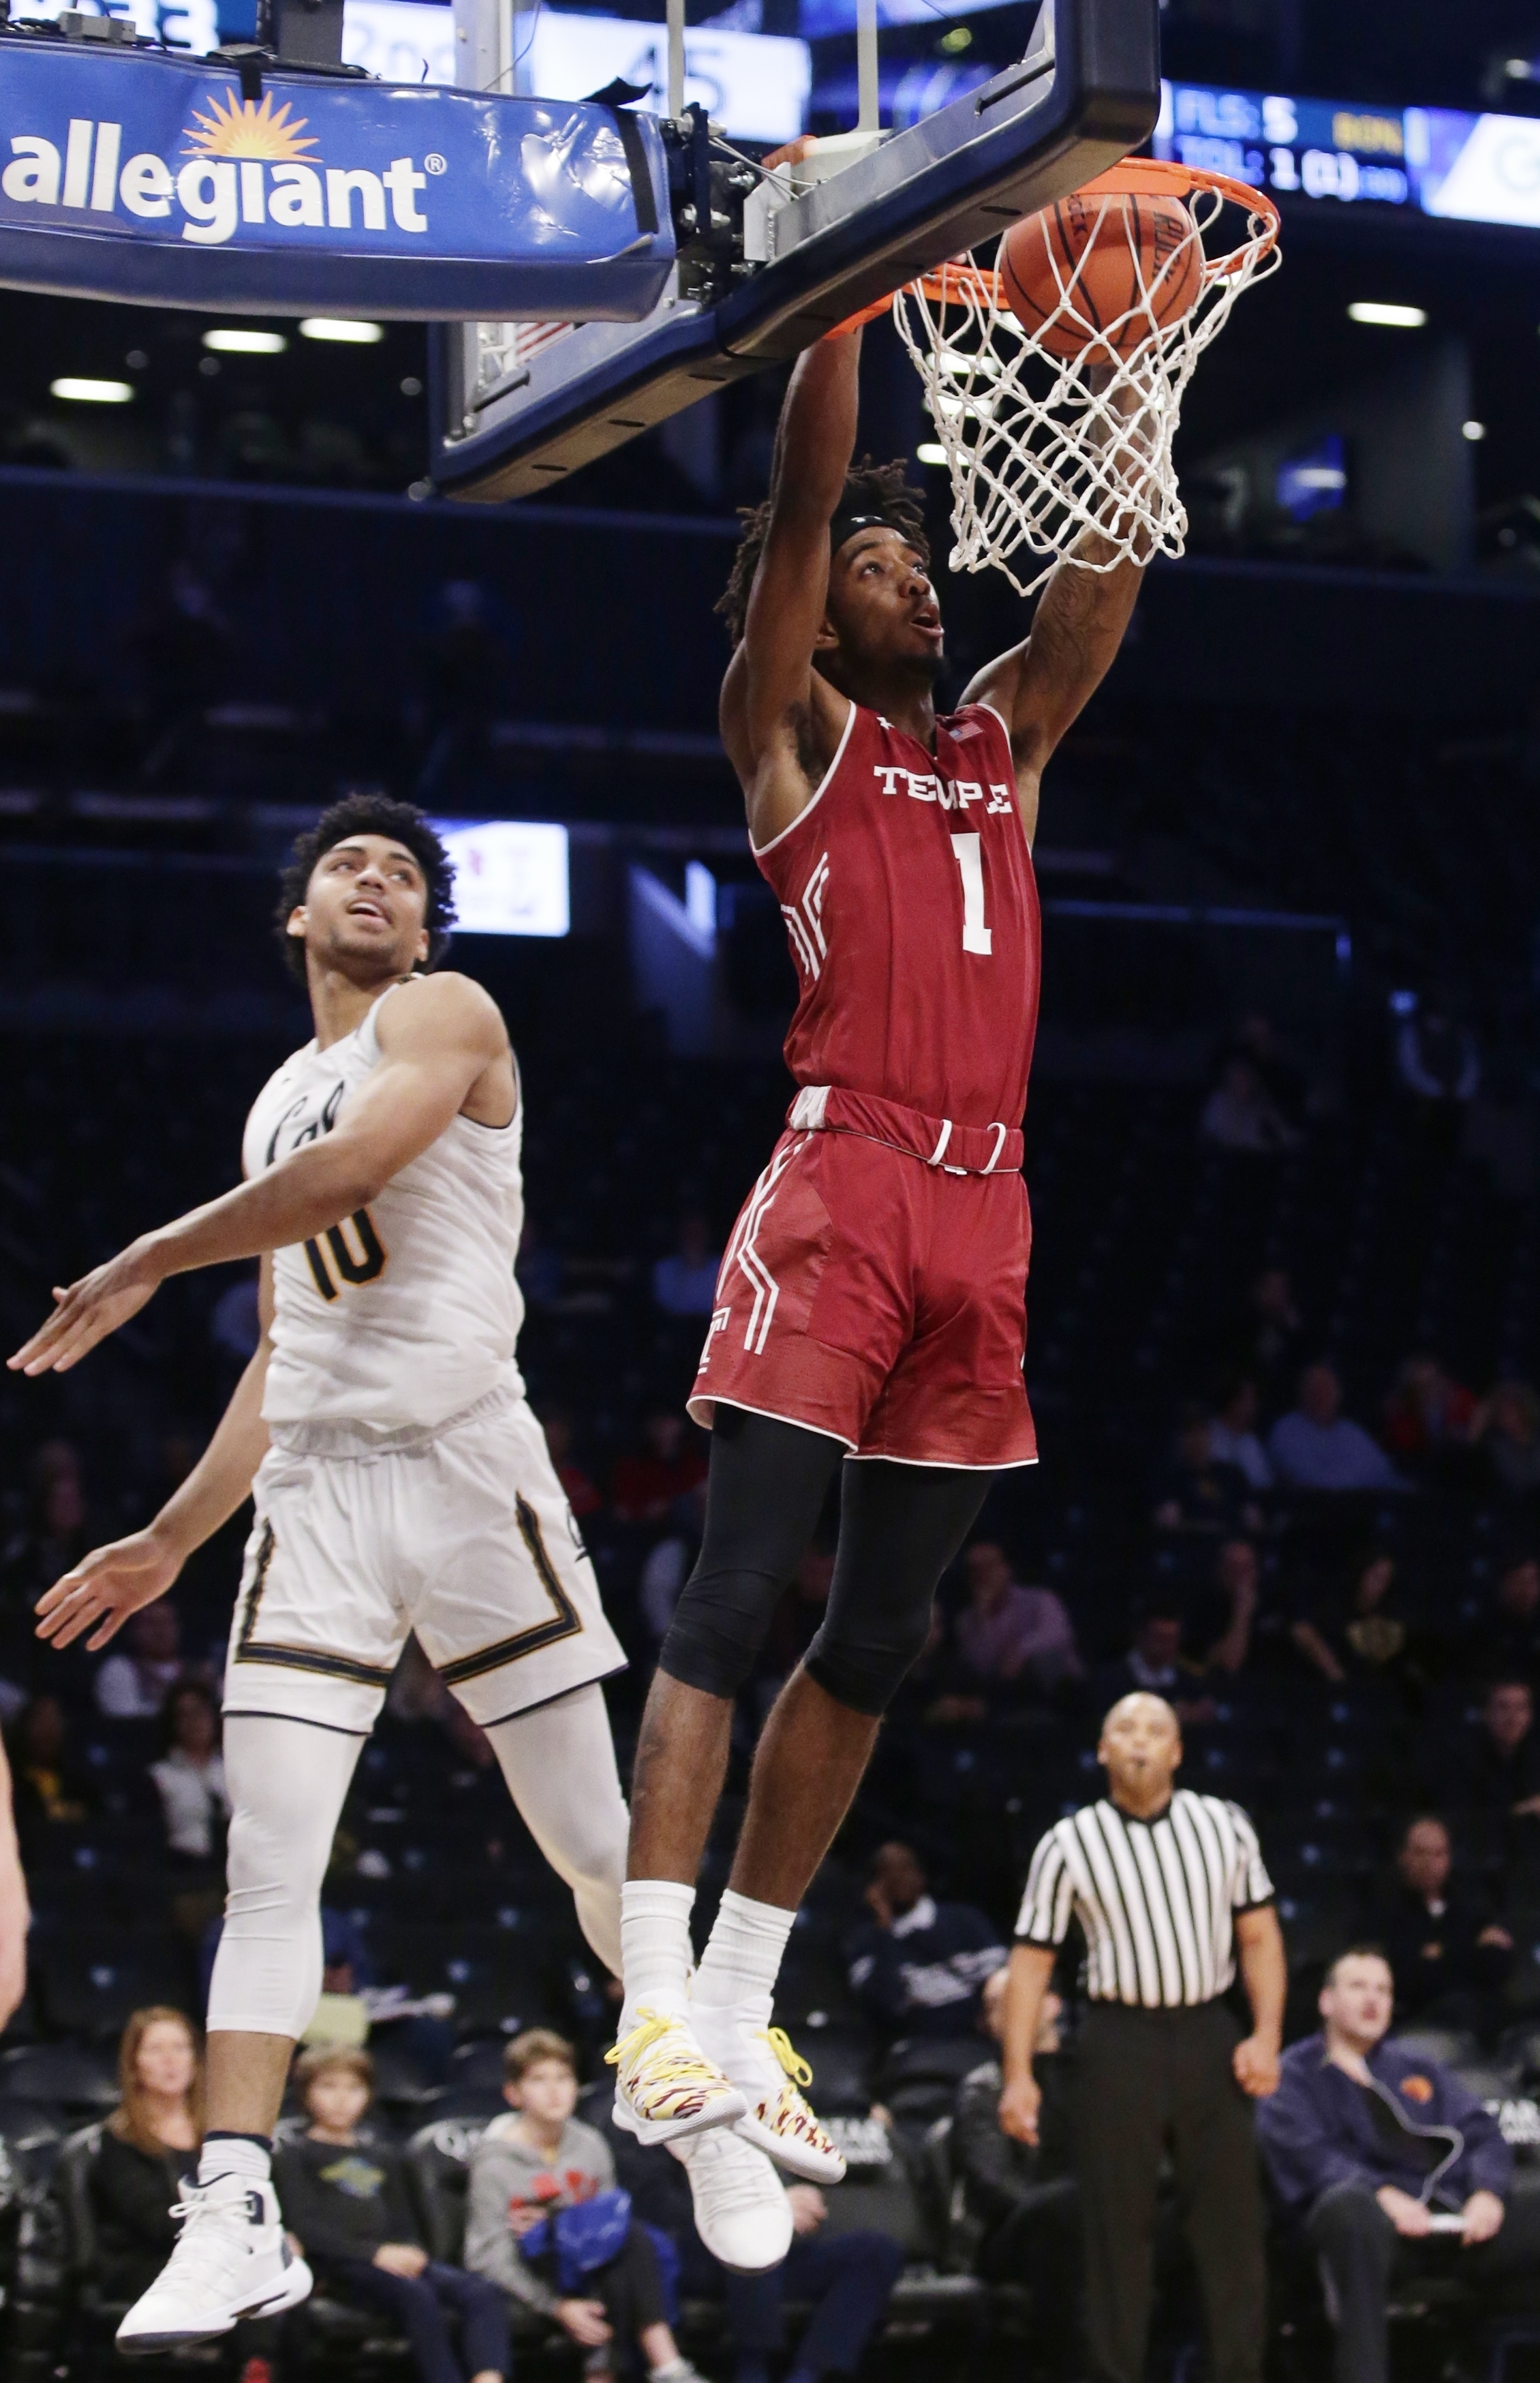 Rose scores 23 points, Temple tops Cal at Legends Classic